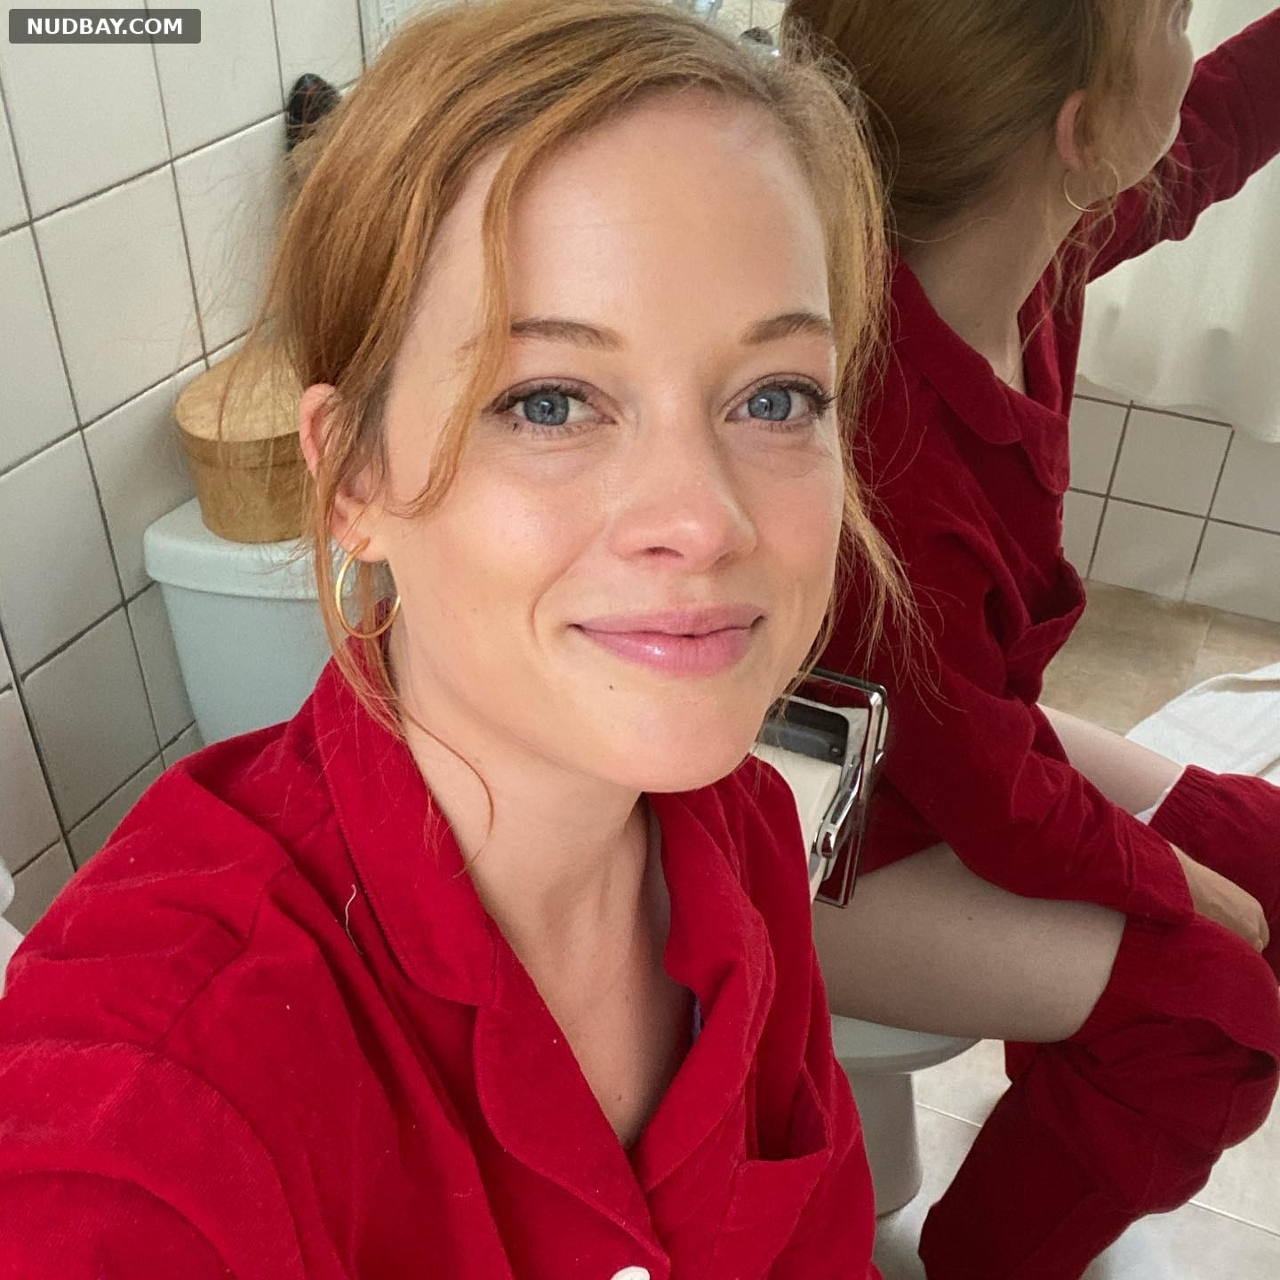 Jane Levy sitting on the toilet 2021